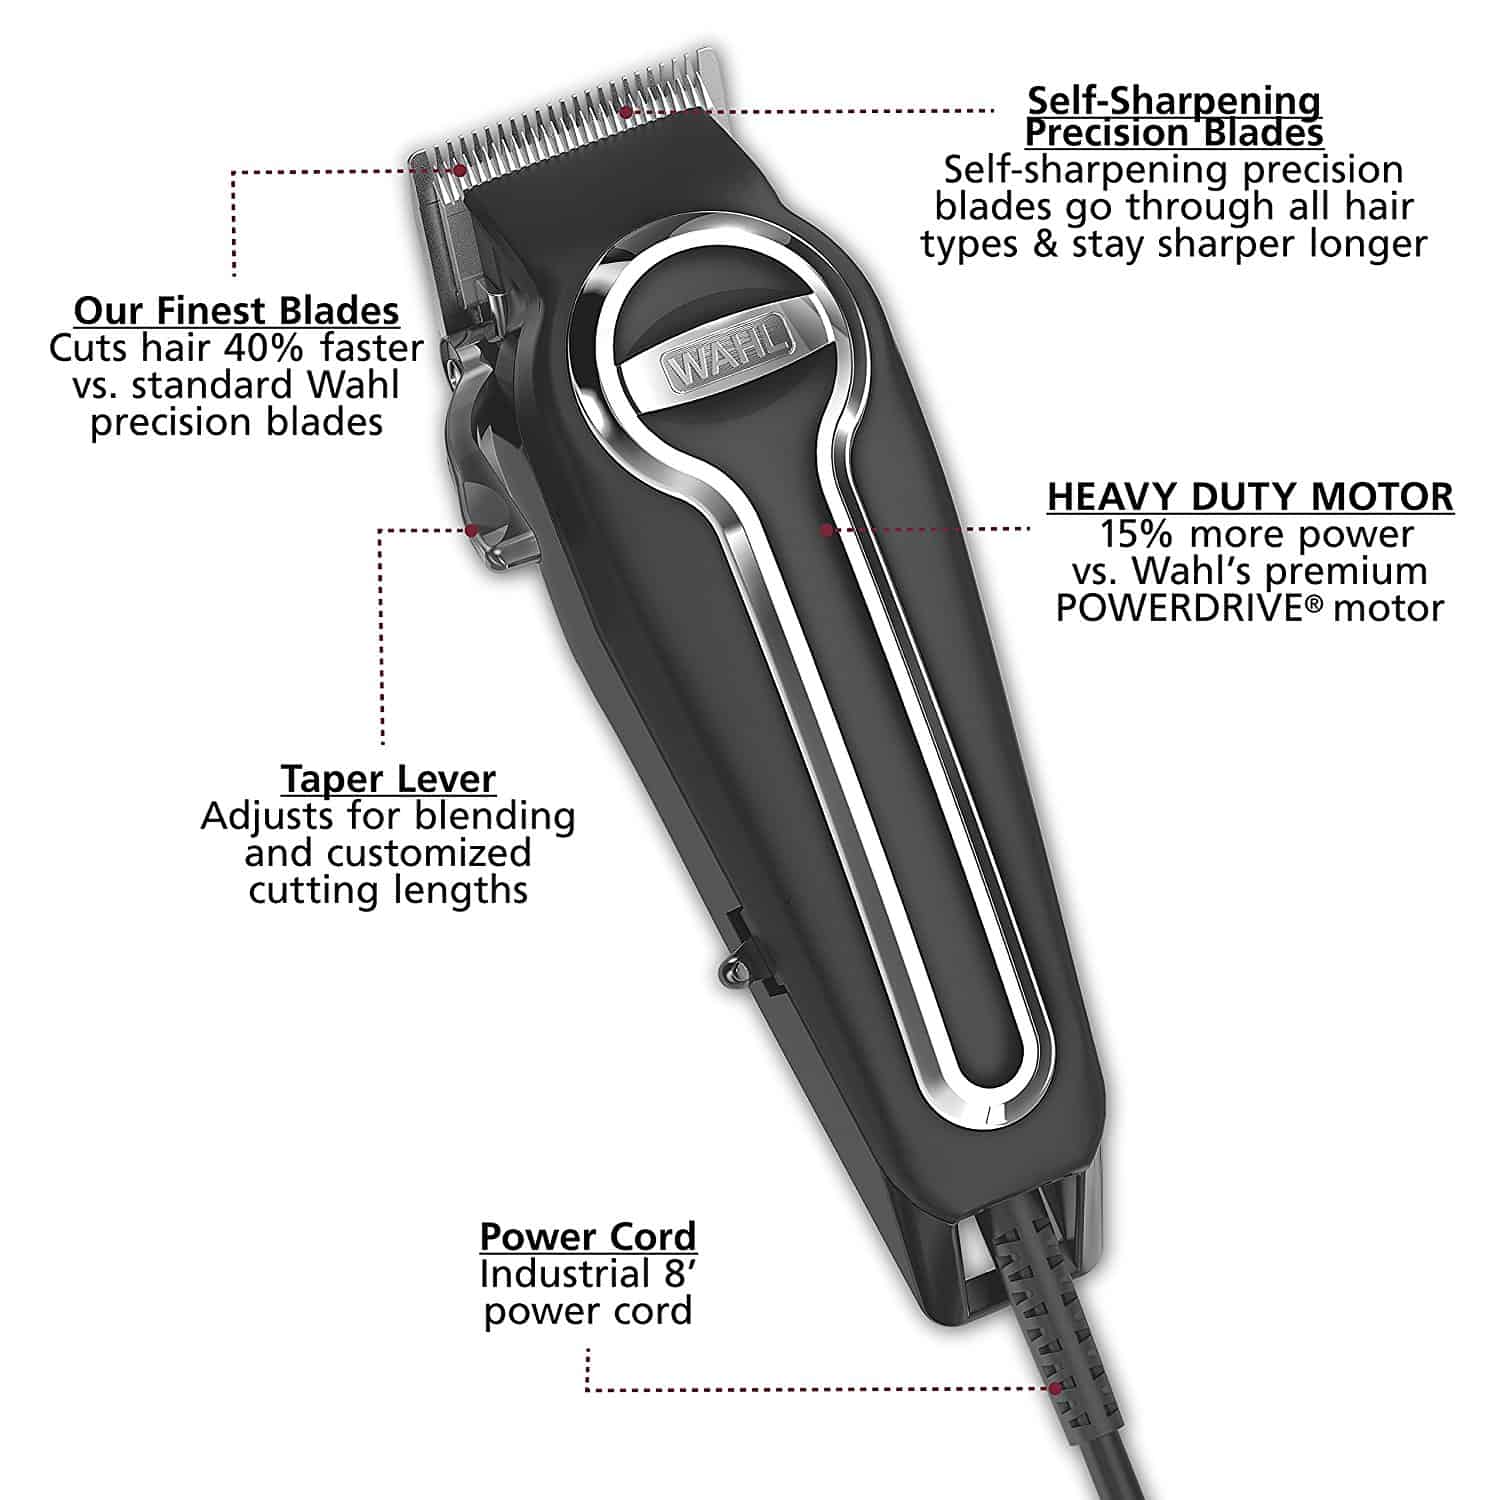 Professional Clipper Blade Sharpening VS The Sharpening Block or